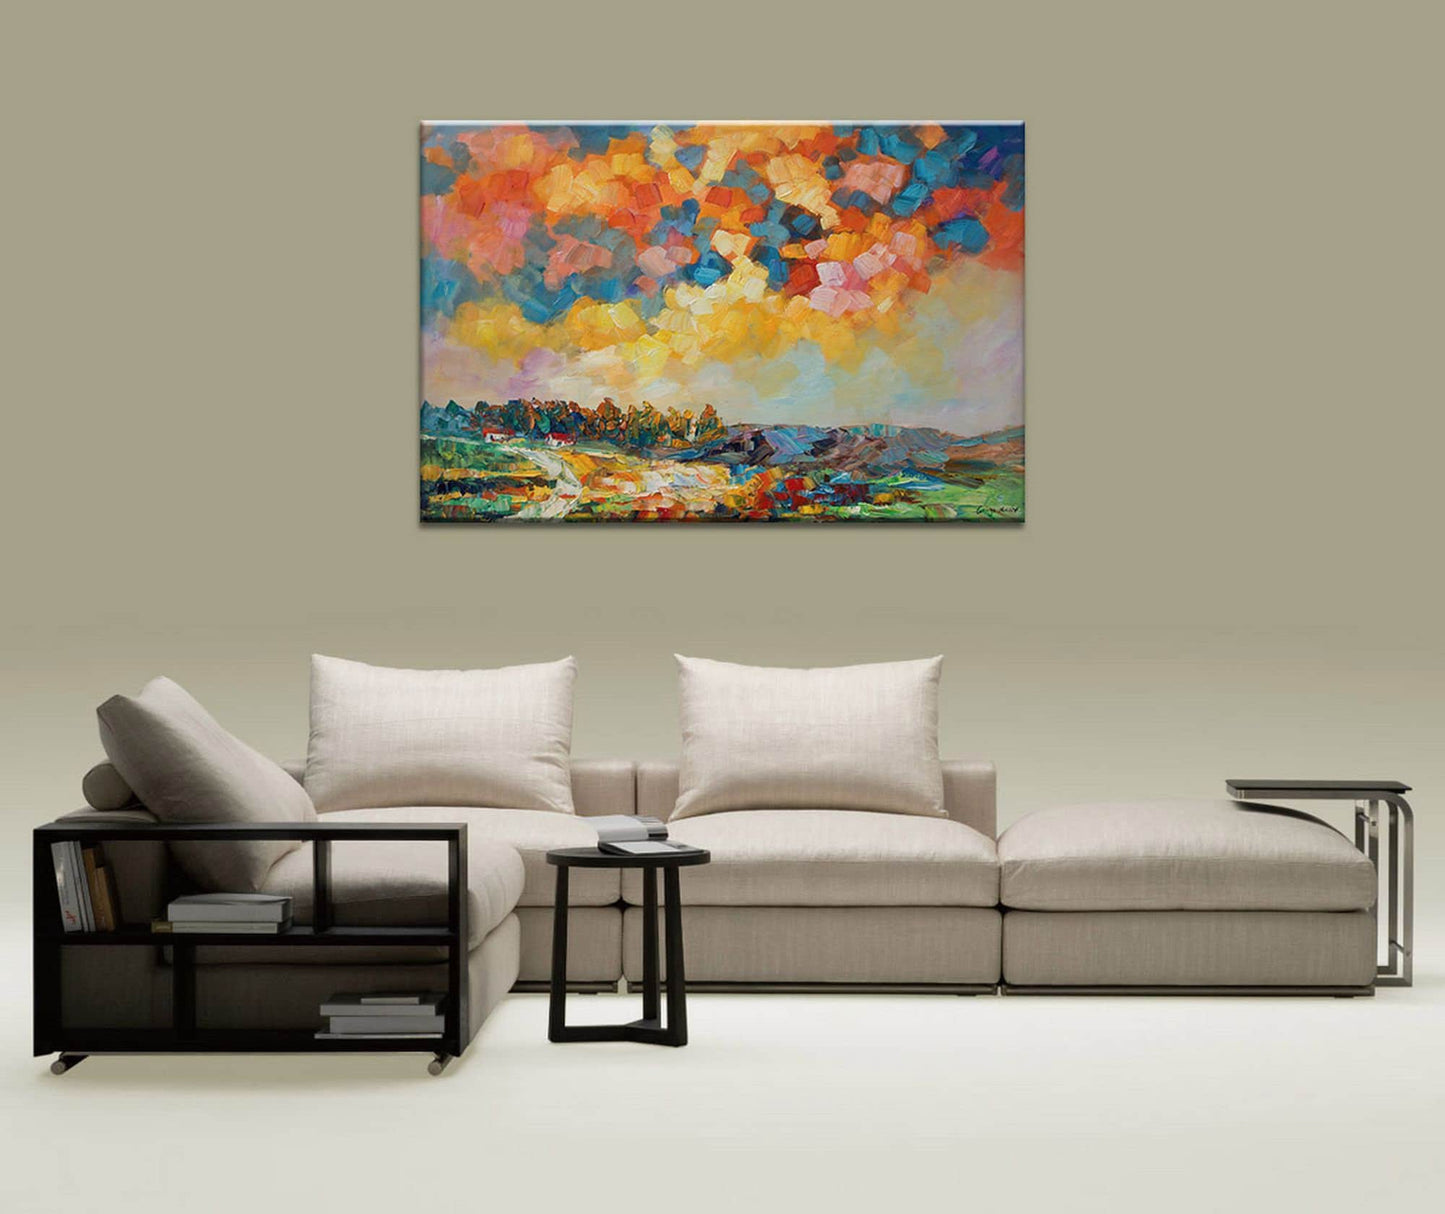 Large Painting, Tuscany Landscape Oil Painting, Kitchen Wall Decor, Contemporary Art, Oil Painting Original, Original Landscape Oil Painting